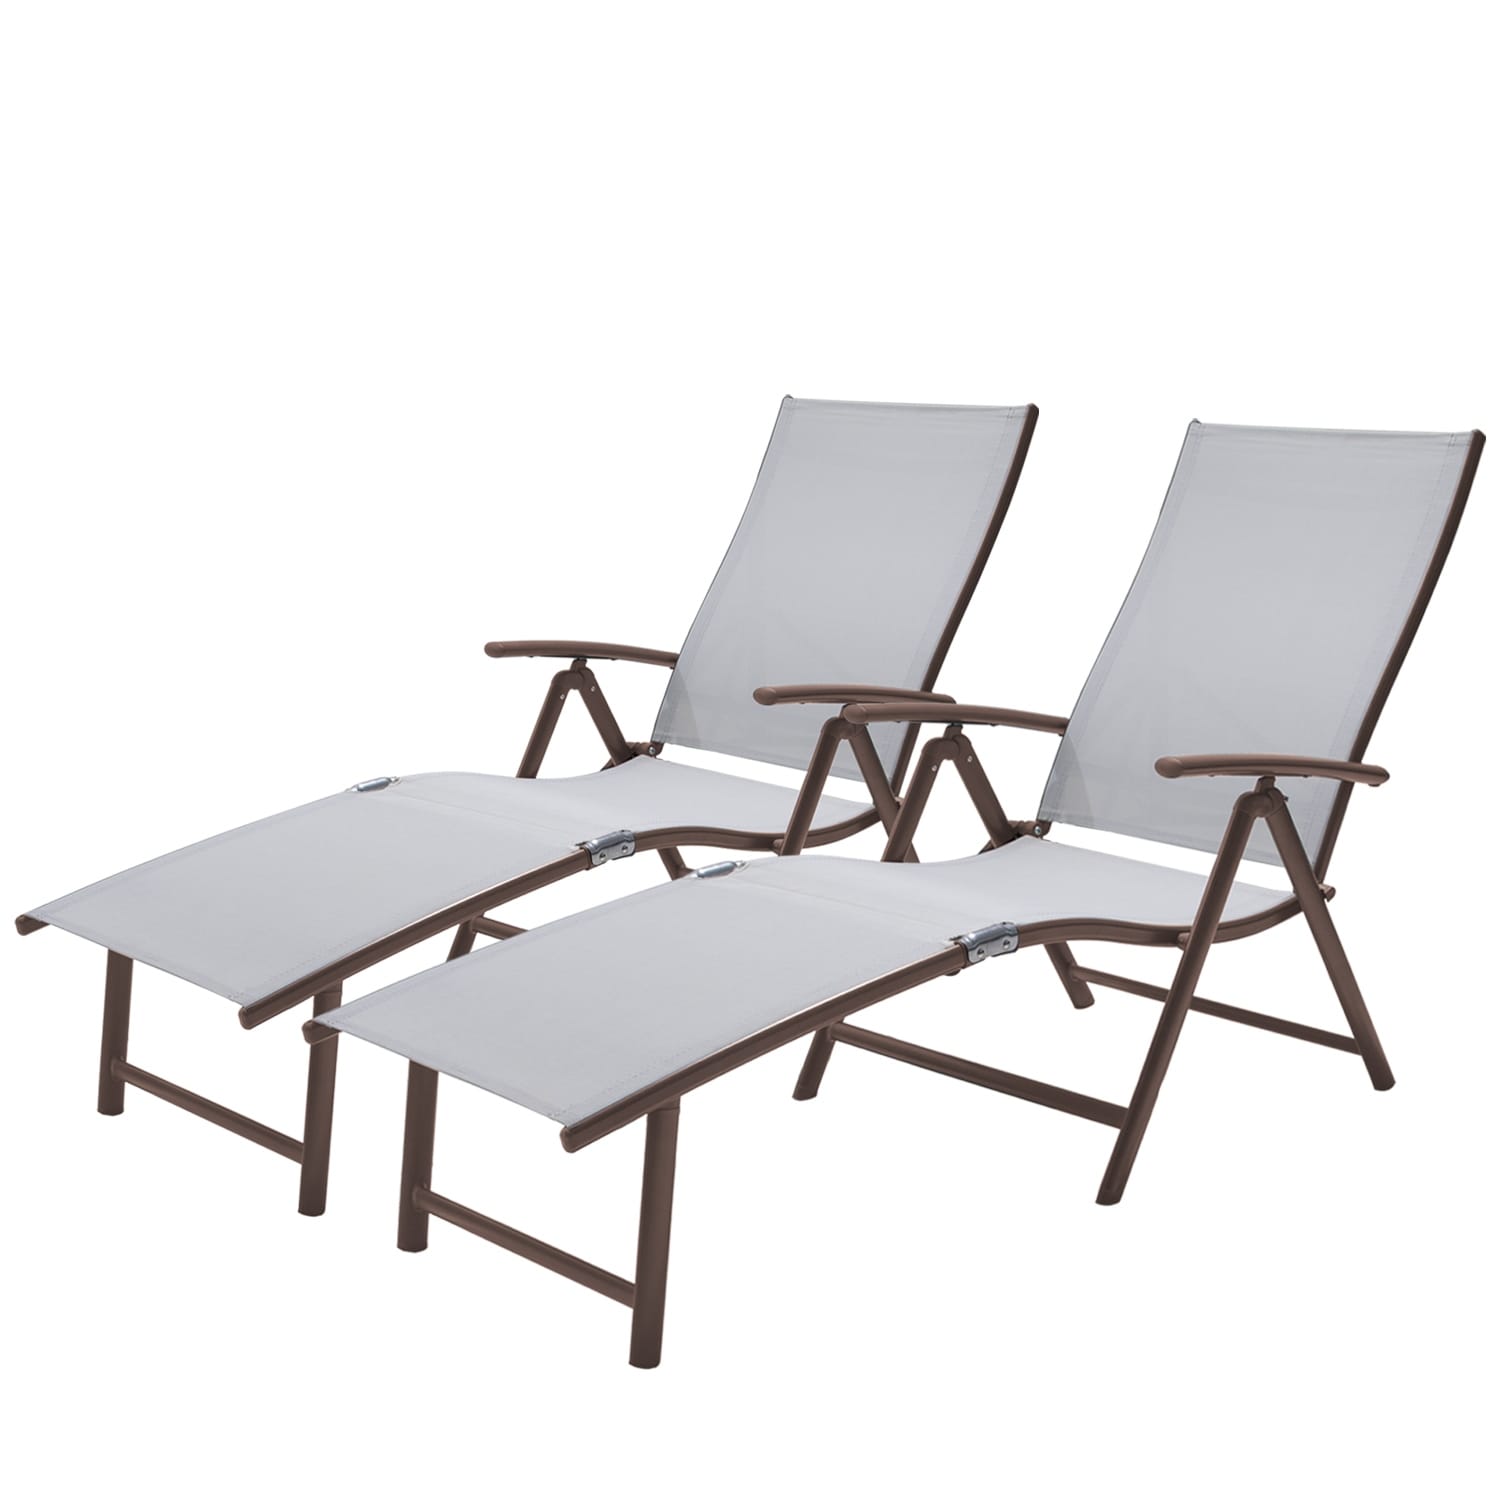 Vredhom Outdoor Portable Folding Chaise Lounge Chair (set Of 2) 70" L X 20" W X 14" H